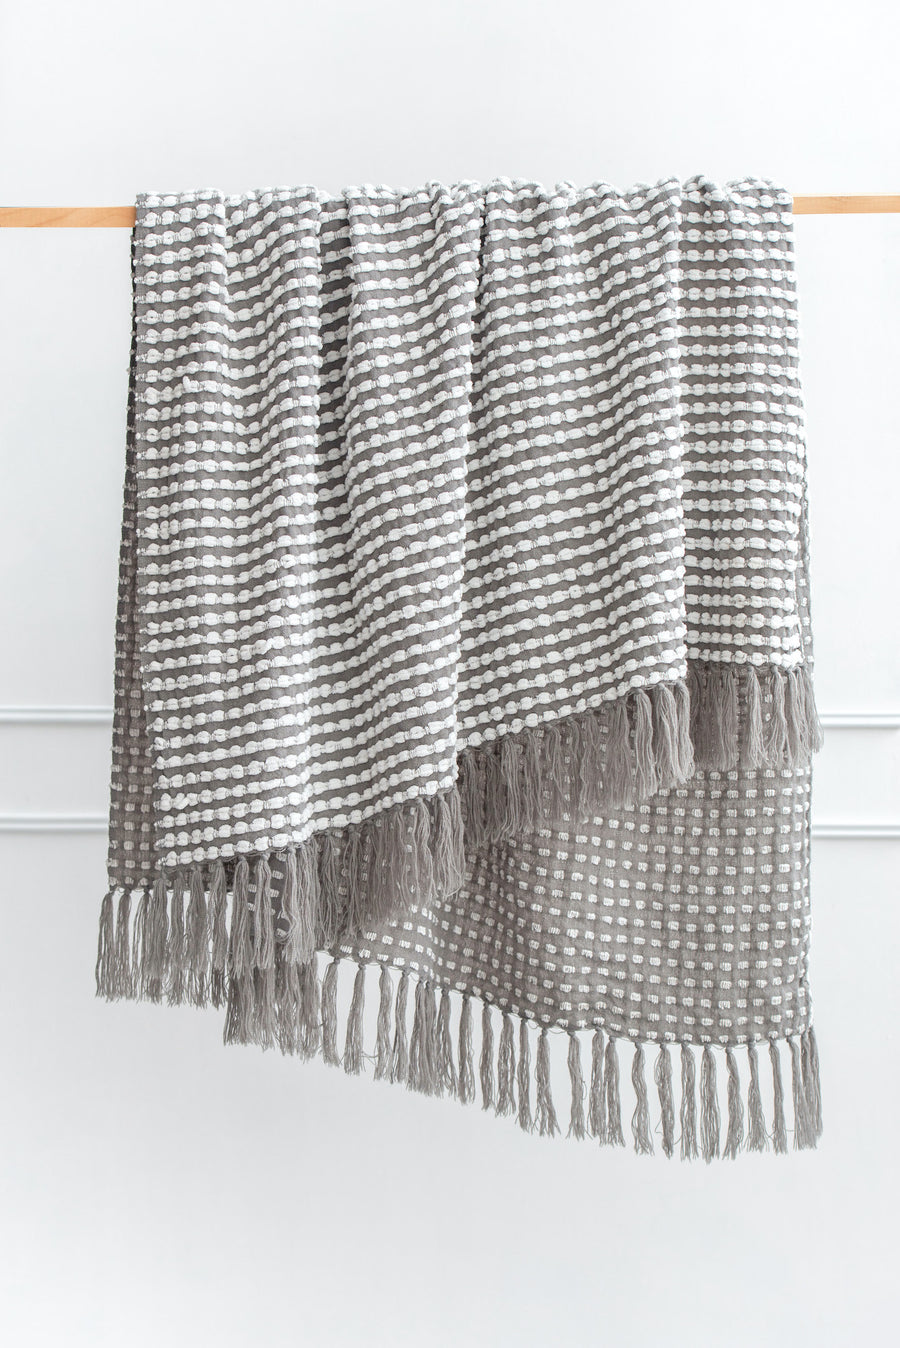 Modern Decorative Throw Blanket with Fringes, Dark Gray and White, 50